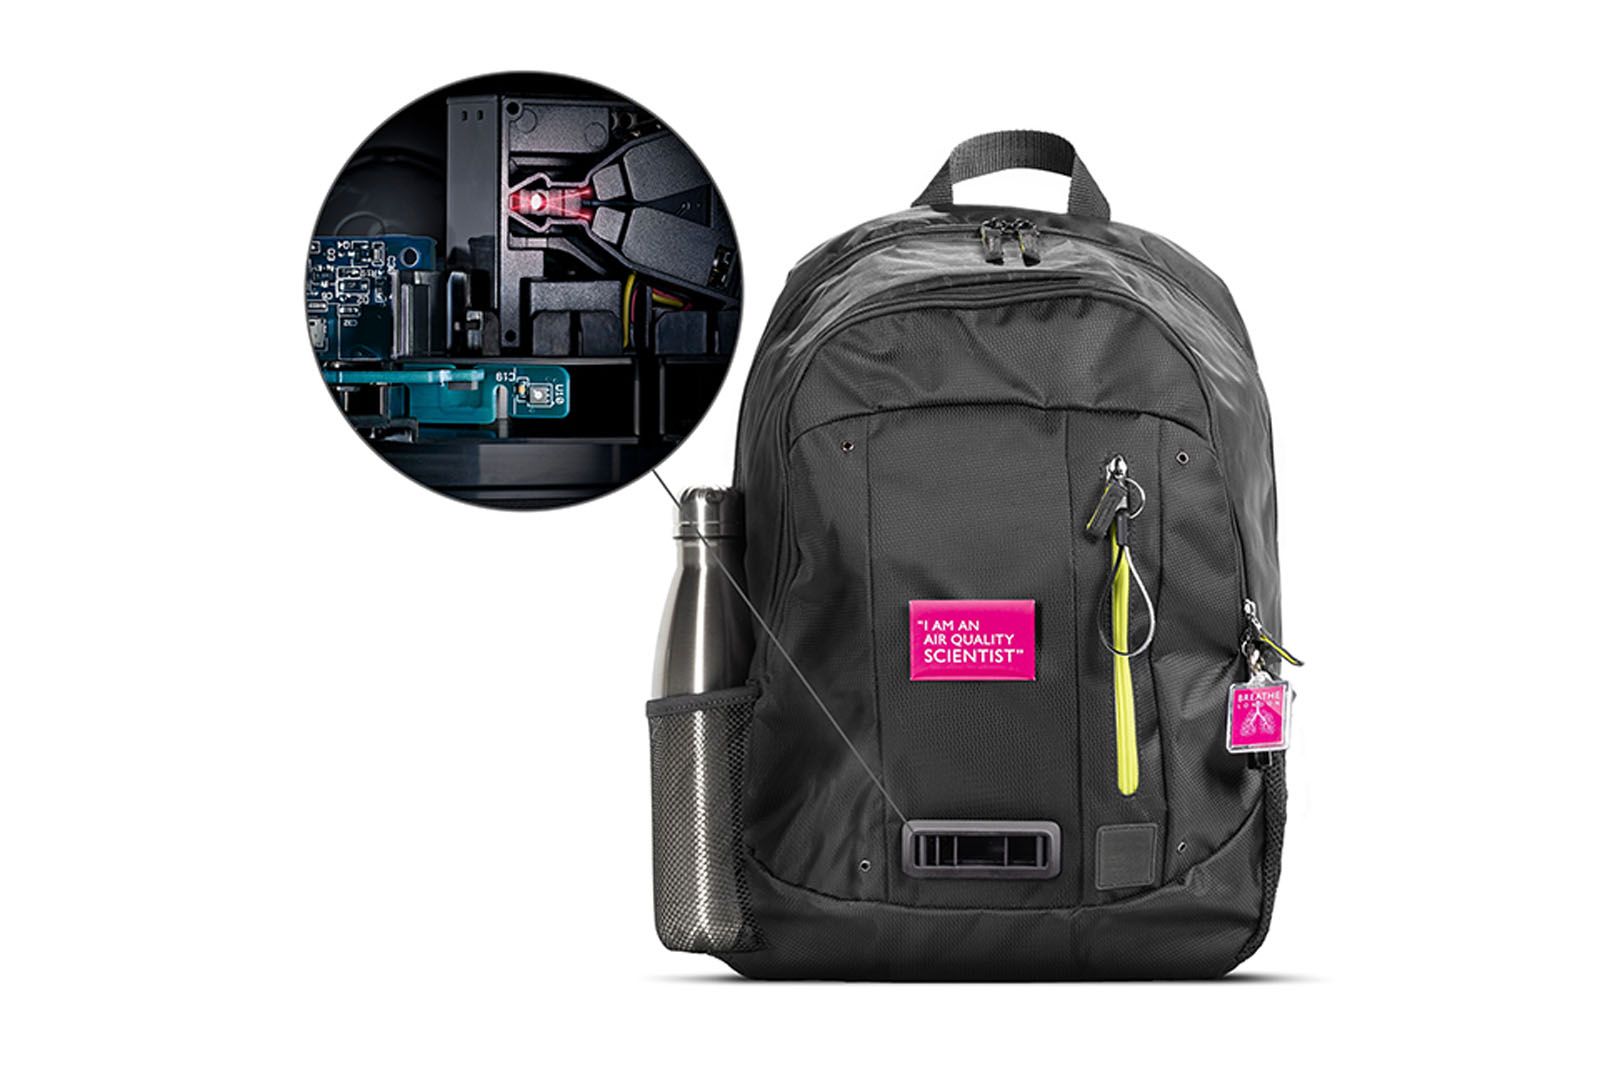 Dyson backpack monitors air quality to report on pollutants that Londons kids are breathing image 1